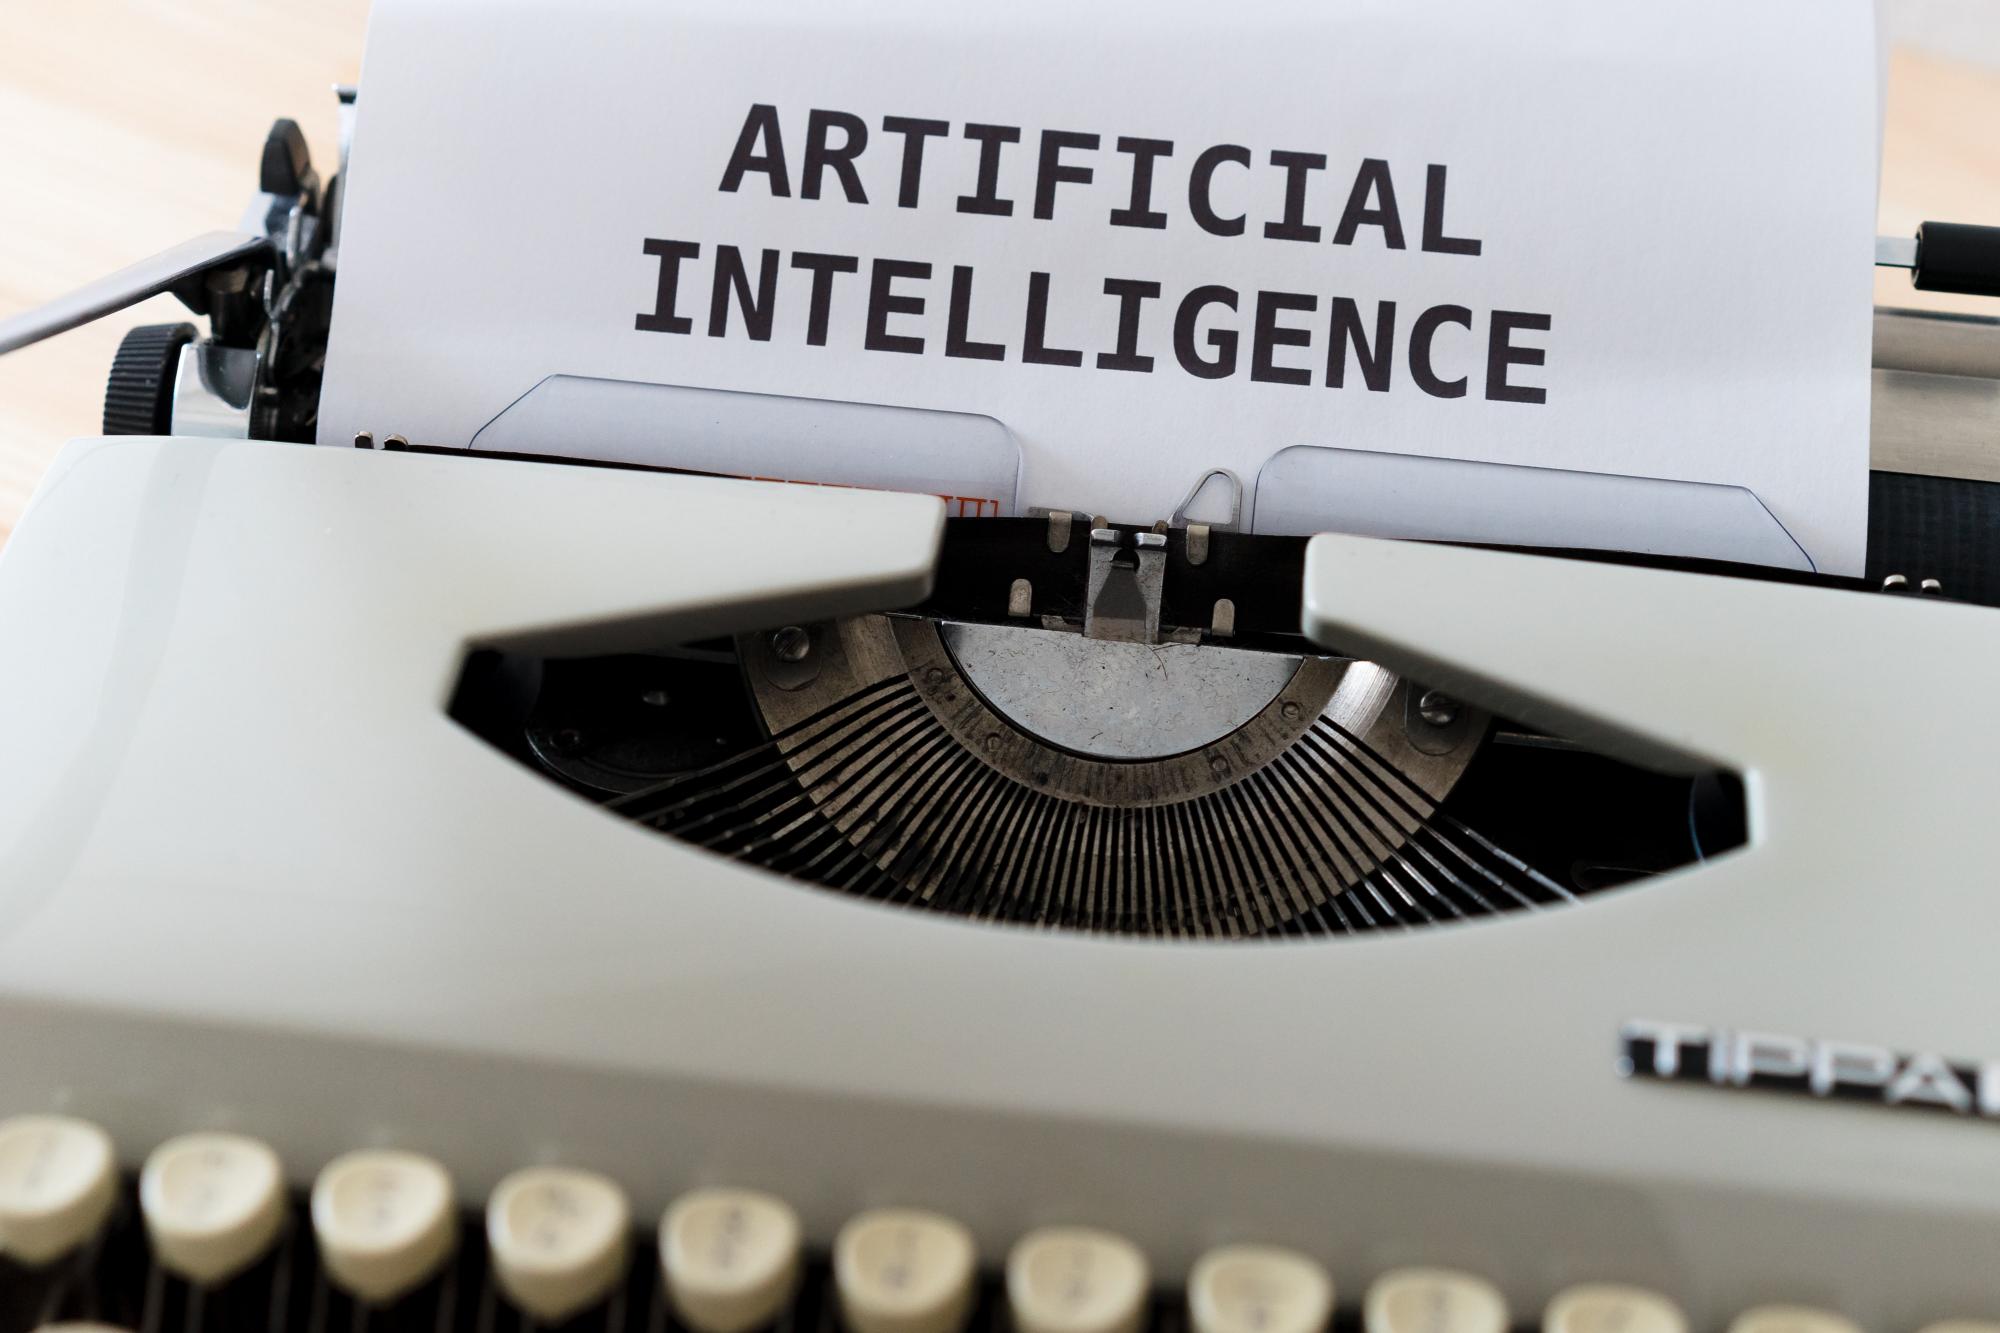 Image of a typewriter with the words "artificial intelligence" typed onto a piece of paper.